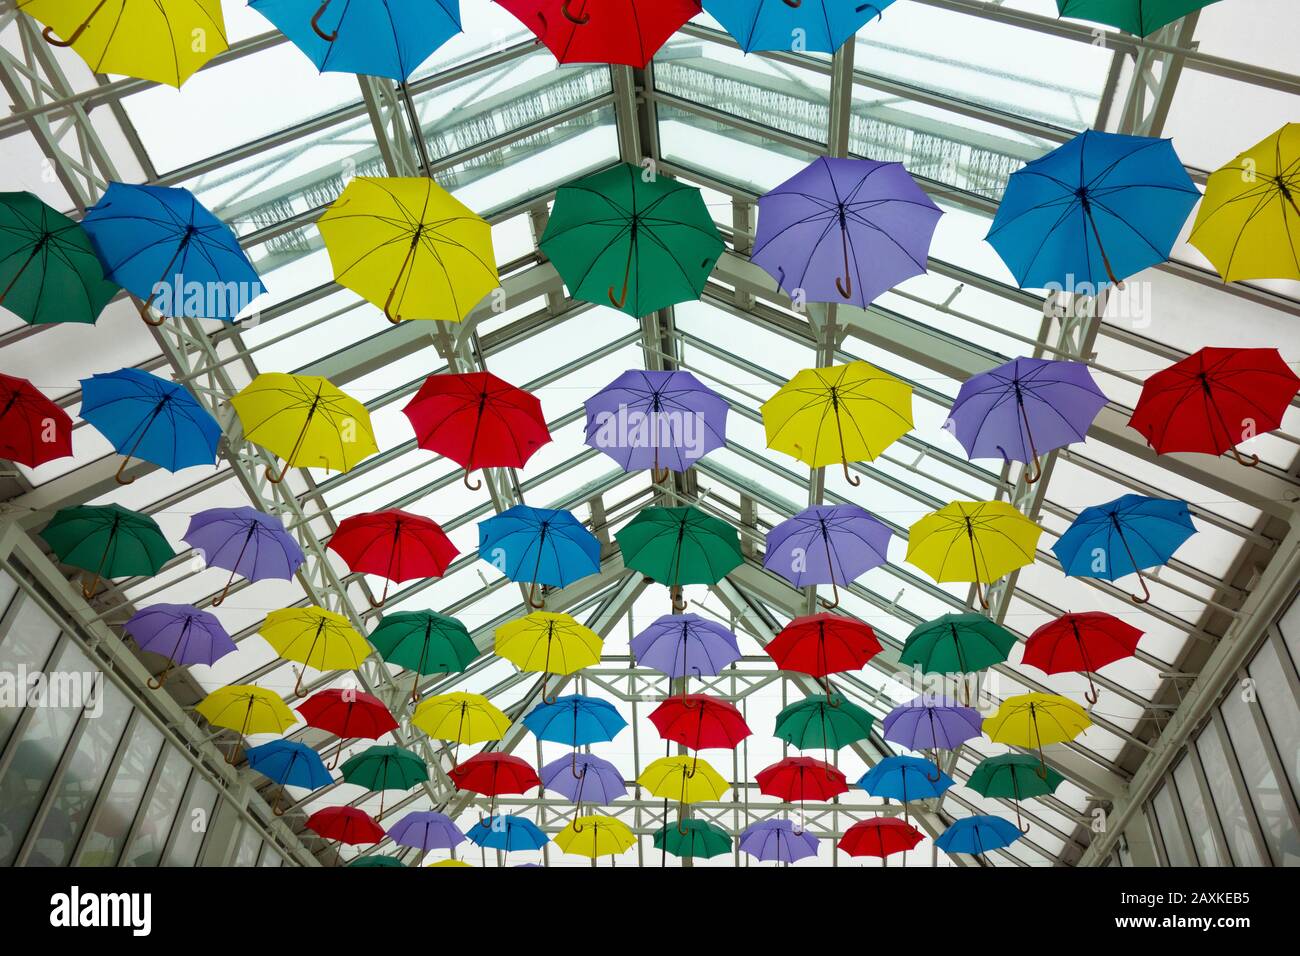 Colourful Umbrellas As Decoration In The Air With Glass Ceiling Celebration and Decoration Stock Photo